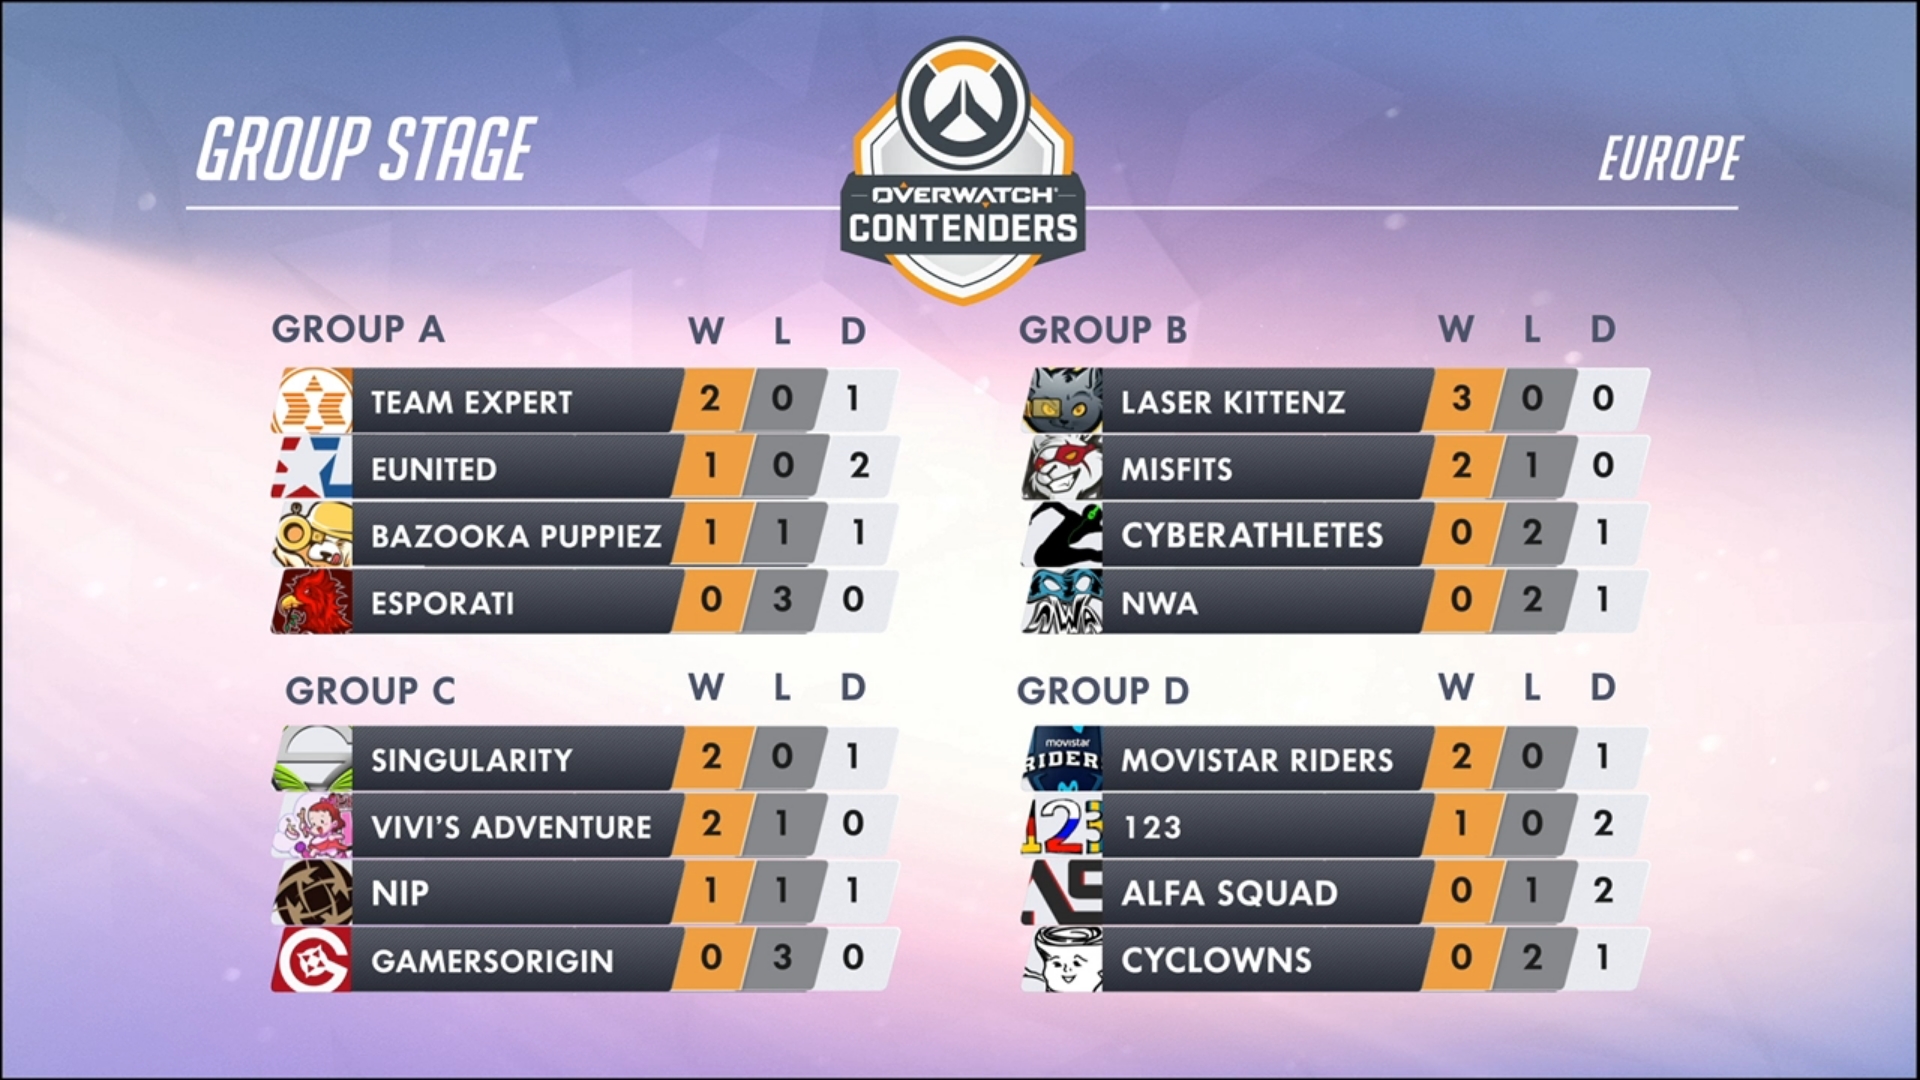 AIDS Fluisteren Mm Laser Kittenz shine on the first day of Overwatch Contenders' EU group  stage - Dot Esports